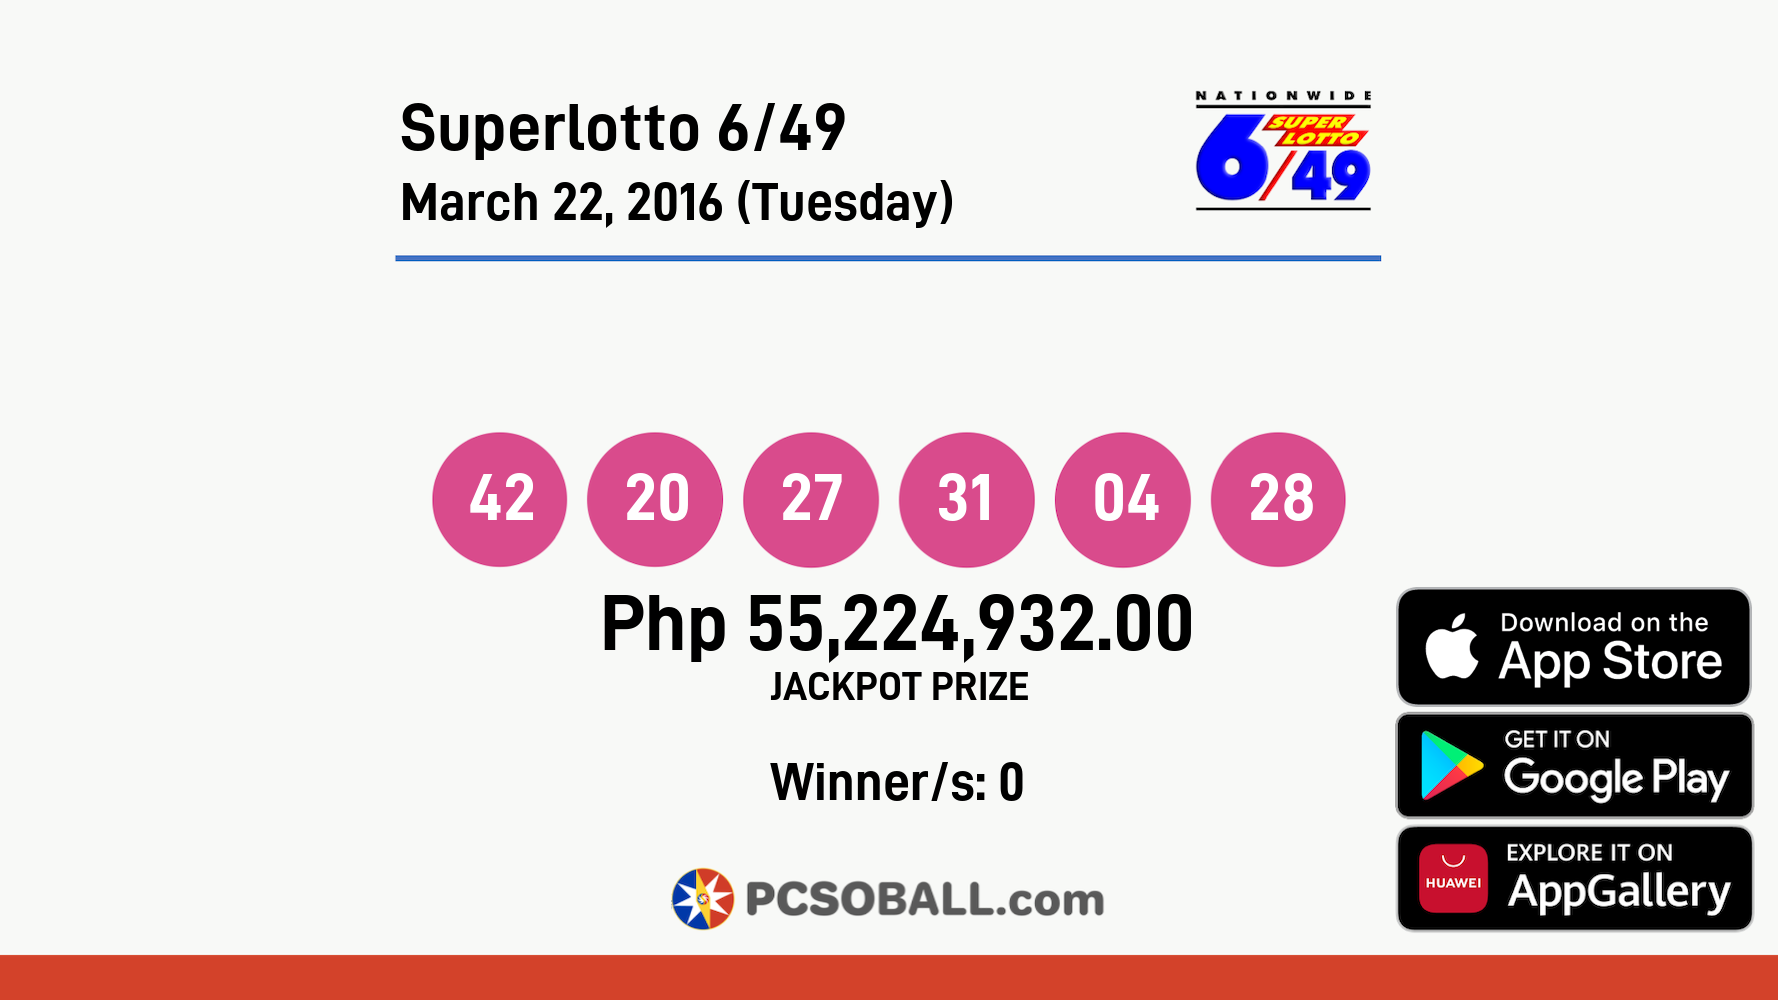 Superlotto 6/49 March 22, 2016 (Tuesday) Result